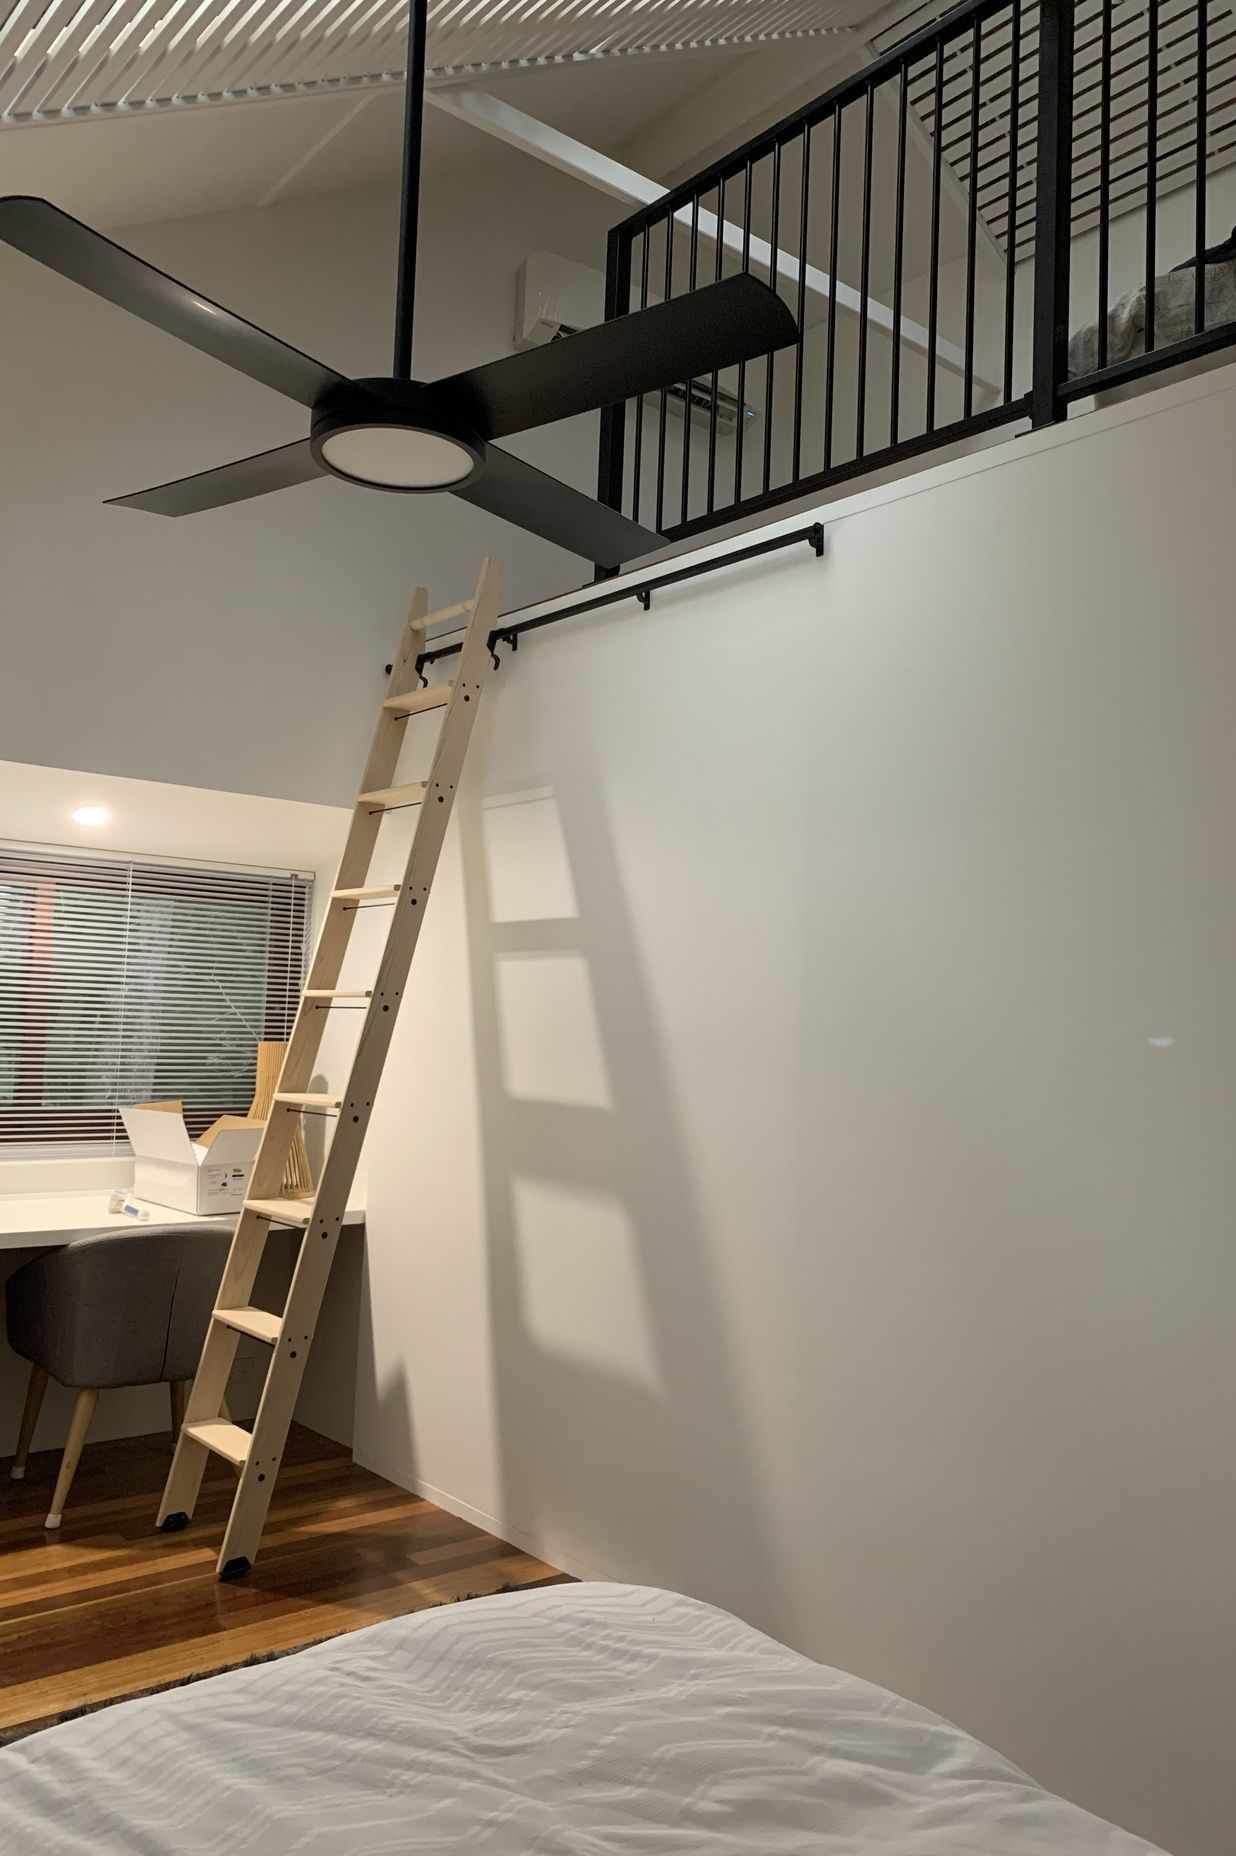 From home art studios and loft bedrooms, to making the most of a hard-to-reach space, where can a ladder be integrated into your next project?